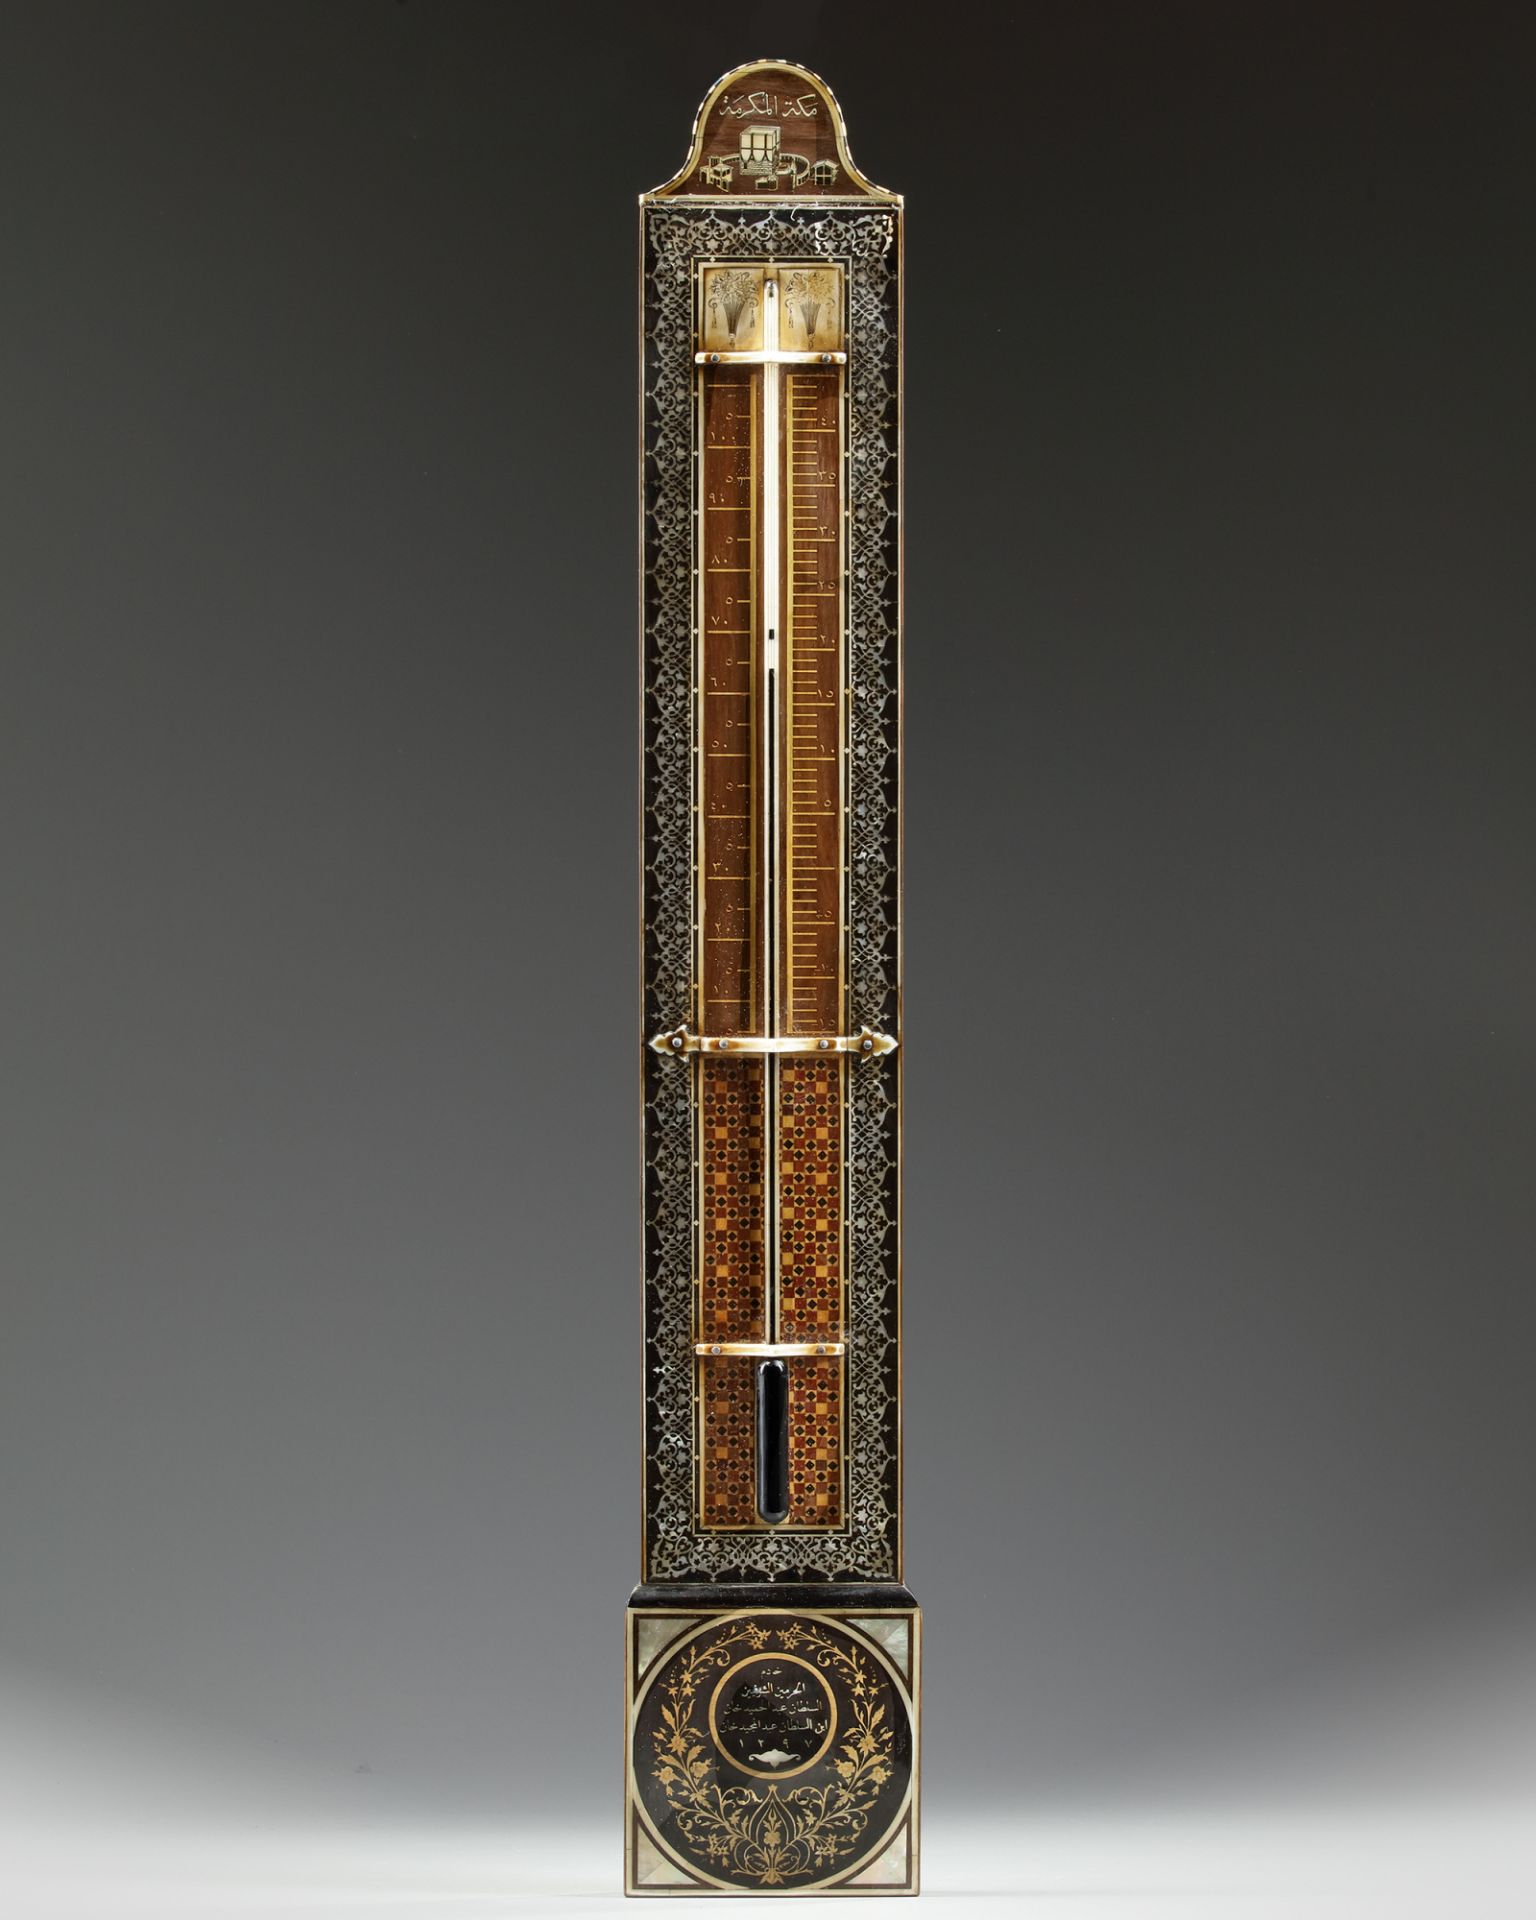 AN OTTOMAN WOODEN MOTHER-OF-PEARL AND IVORY INLAID BAROMETER,1297 AH/1879 - 1880 AD - Image 5 of 12